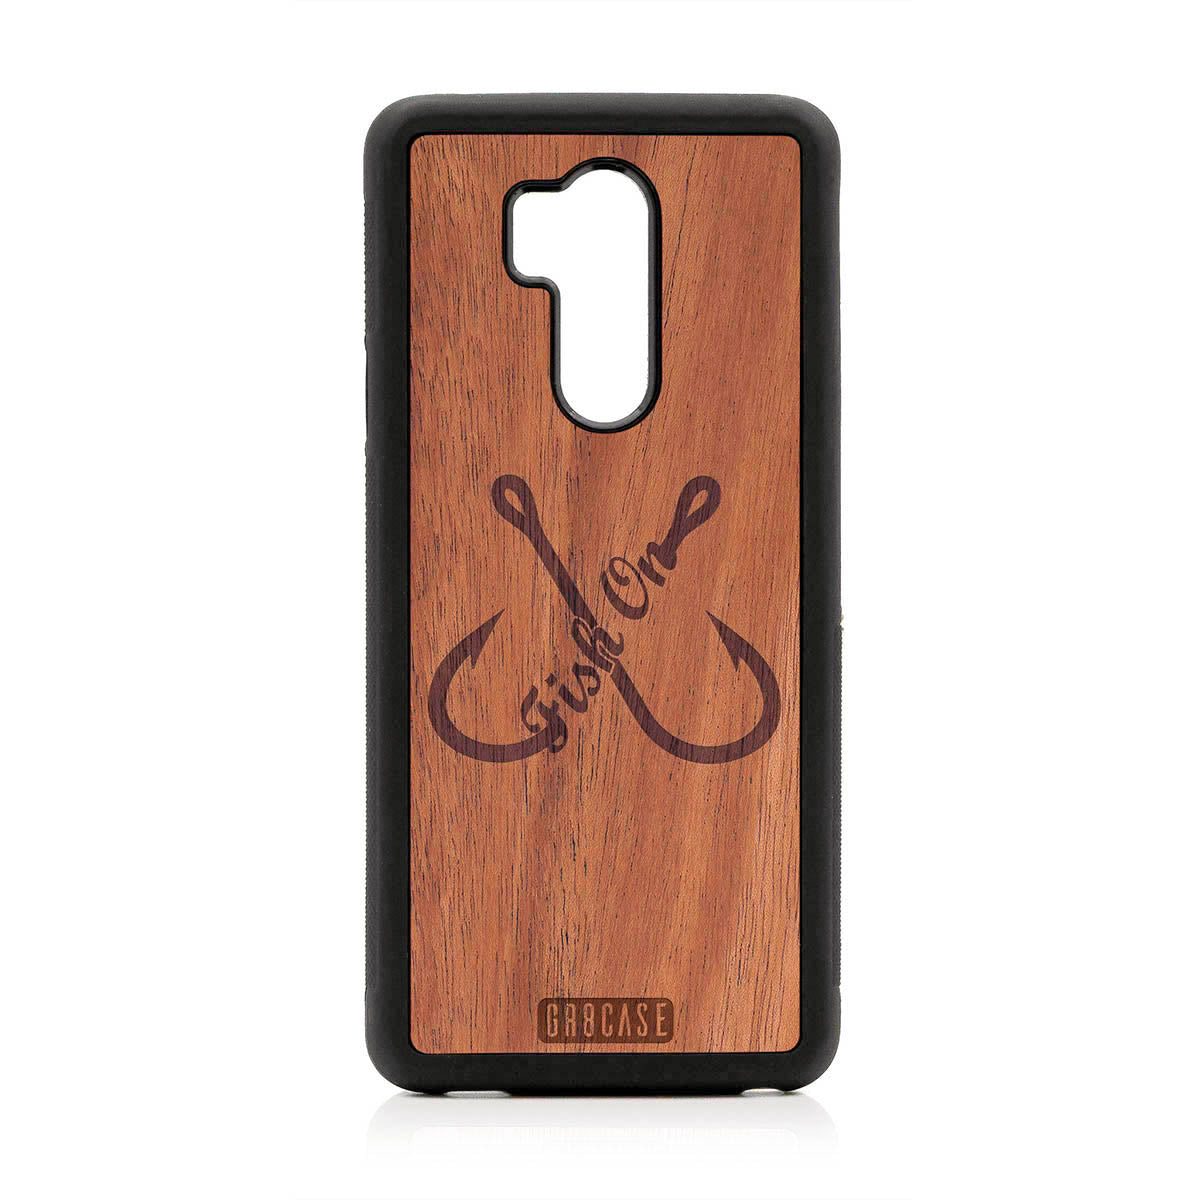 Fish On (Fish Hooks) Design Wood Case For LG G7 ThinQ by GR8CASE